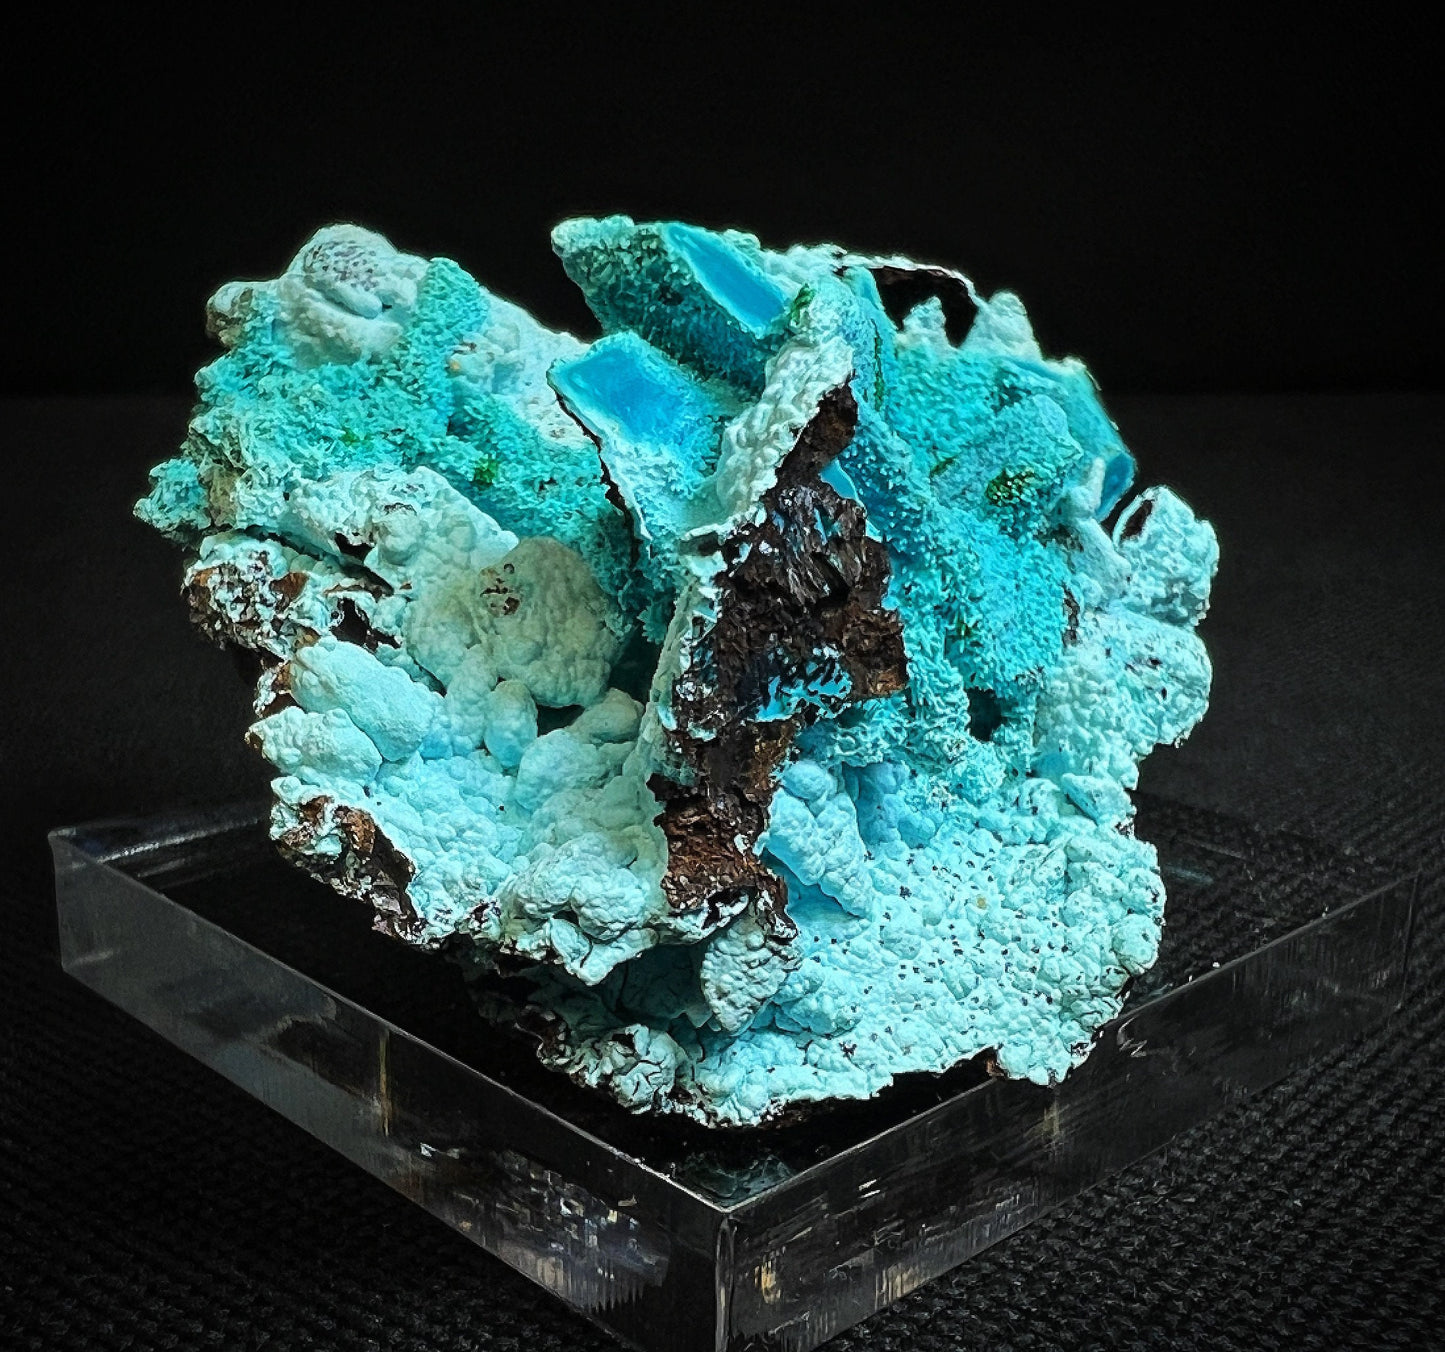 Chrysocolla Pseudomorph From Tenke Fungurume, Kolweze, Dr Congo- Collectors Piece, Statement Piece, Home Décor, Gift (Stand Included)